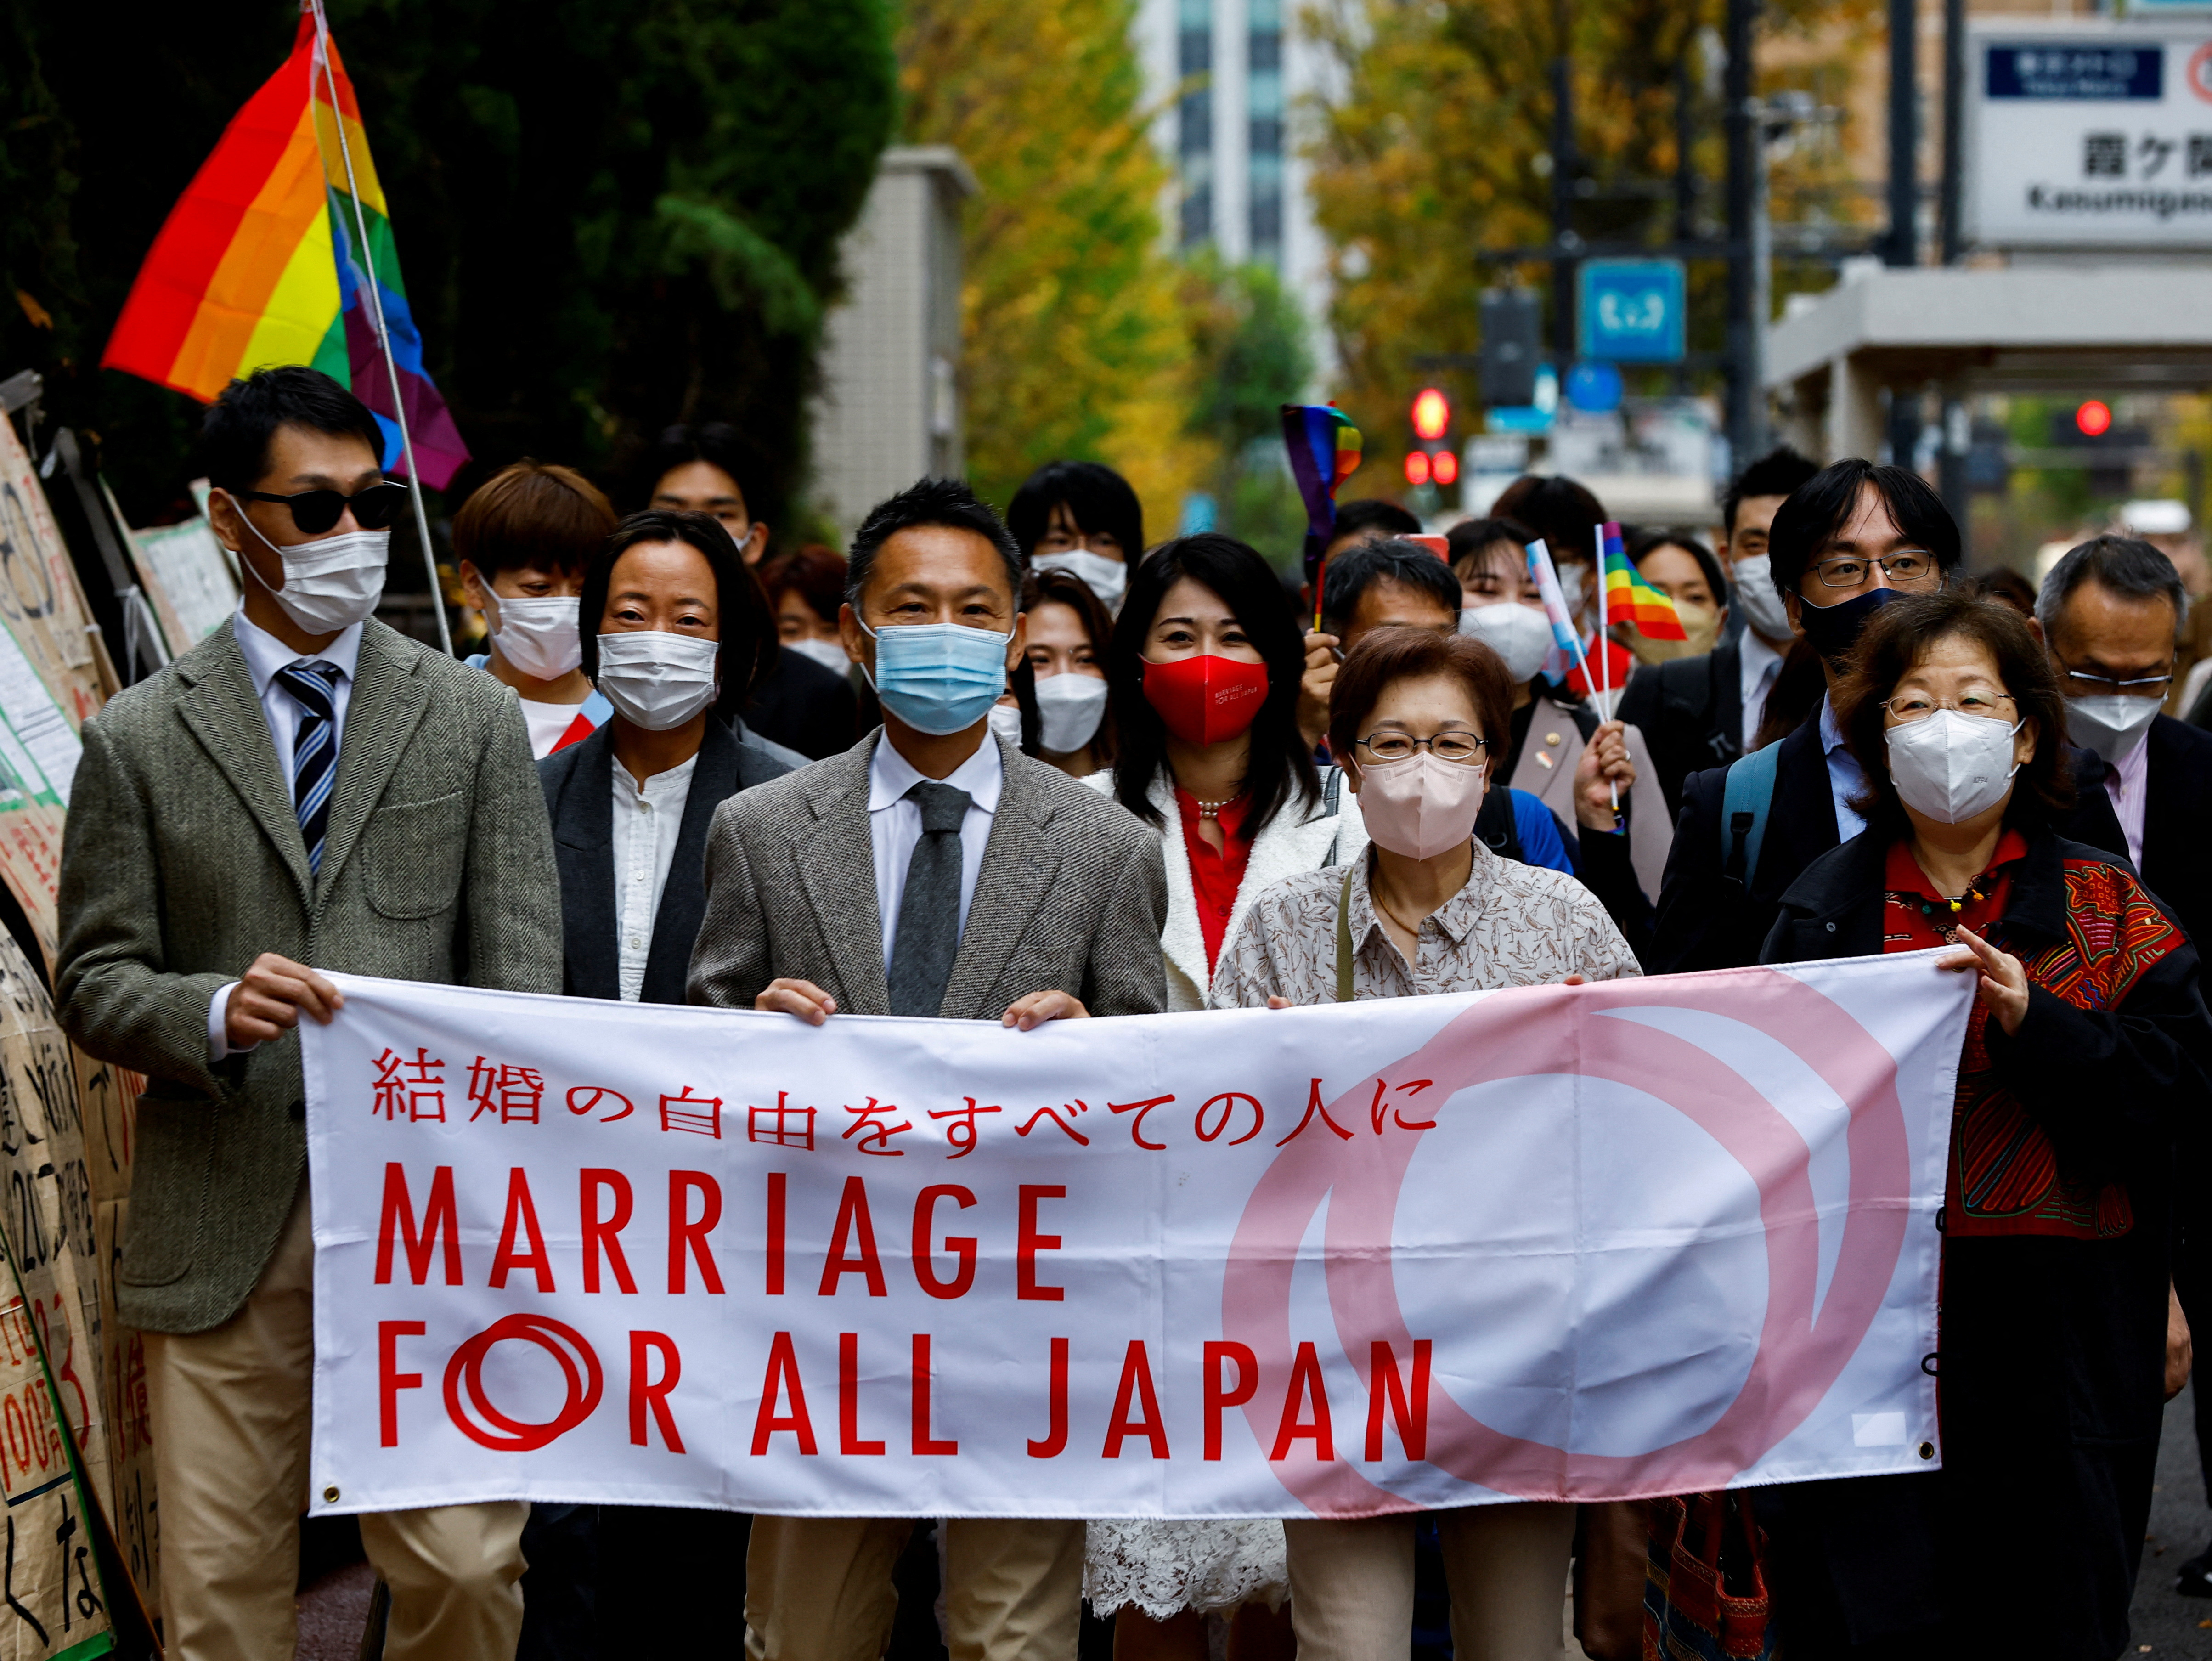 Tokyo court rules on constitutionality of same-sex marriage